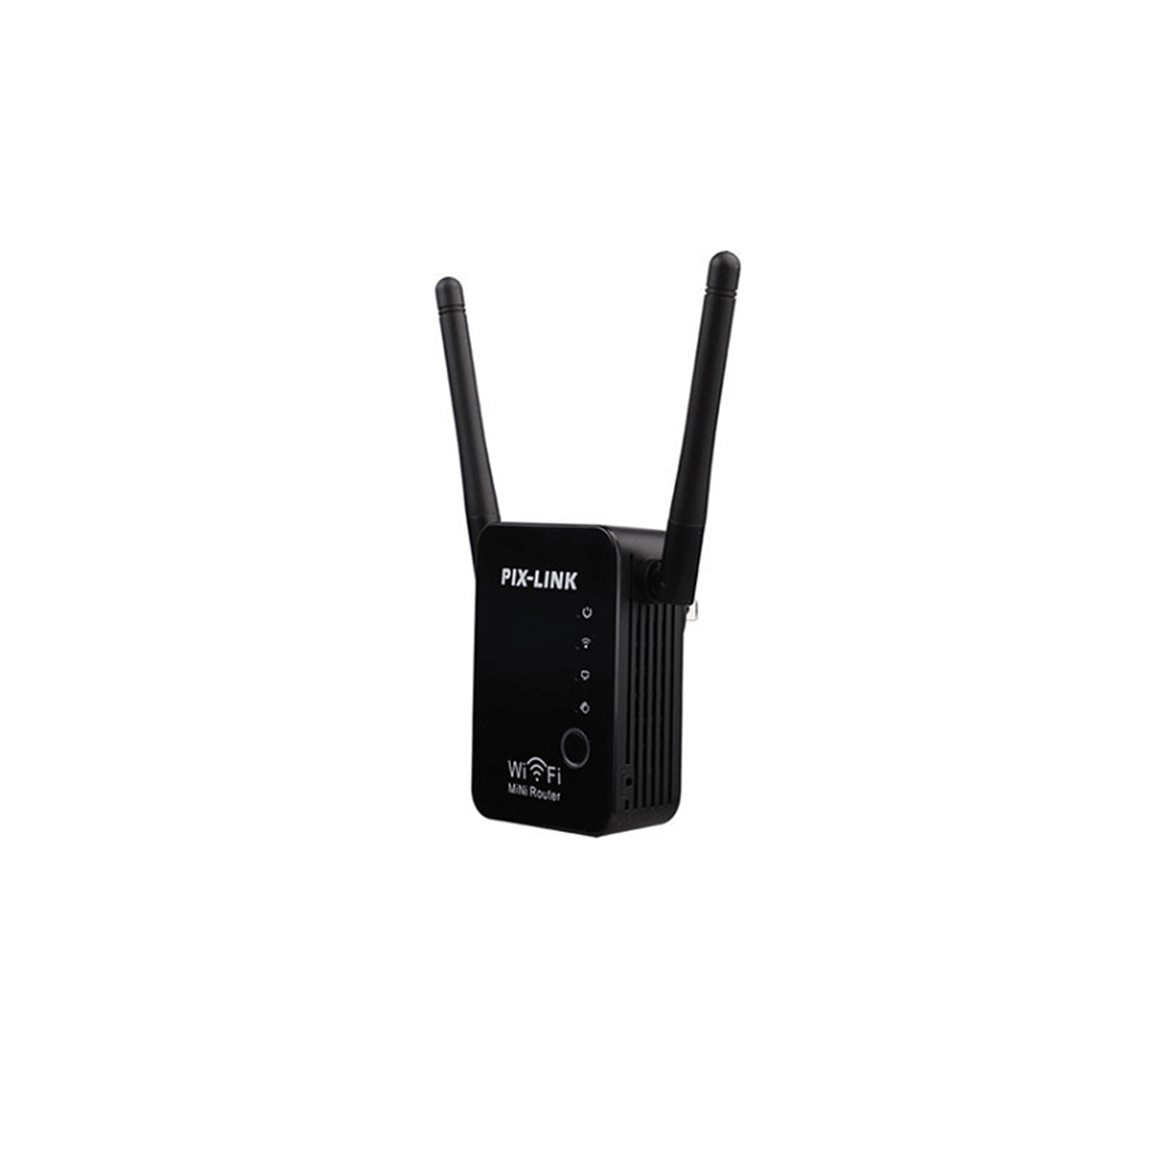 pix-link lv-wr17 wifi repeater/router/access point wireless 300mbps range extender wi-fi 2 external antennas